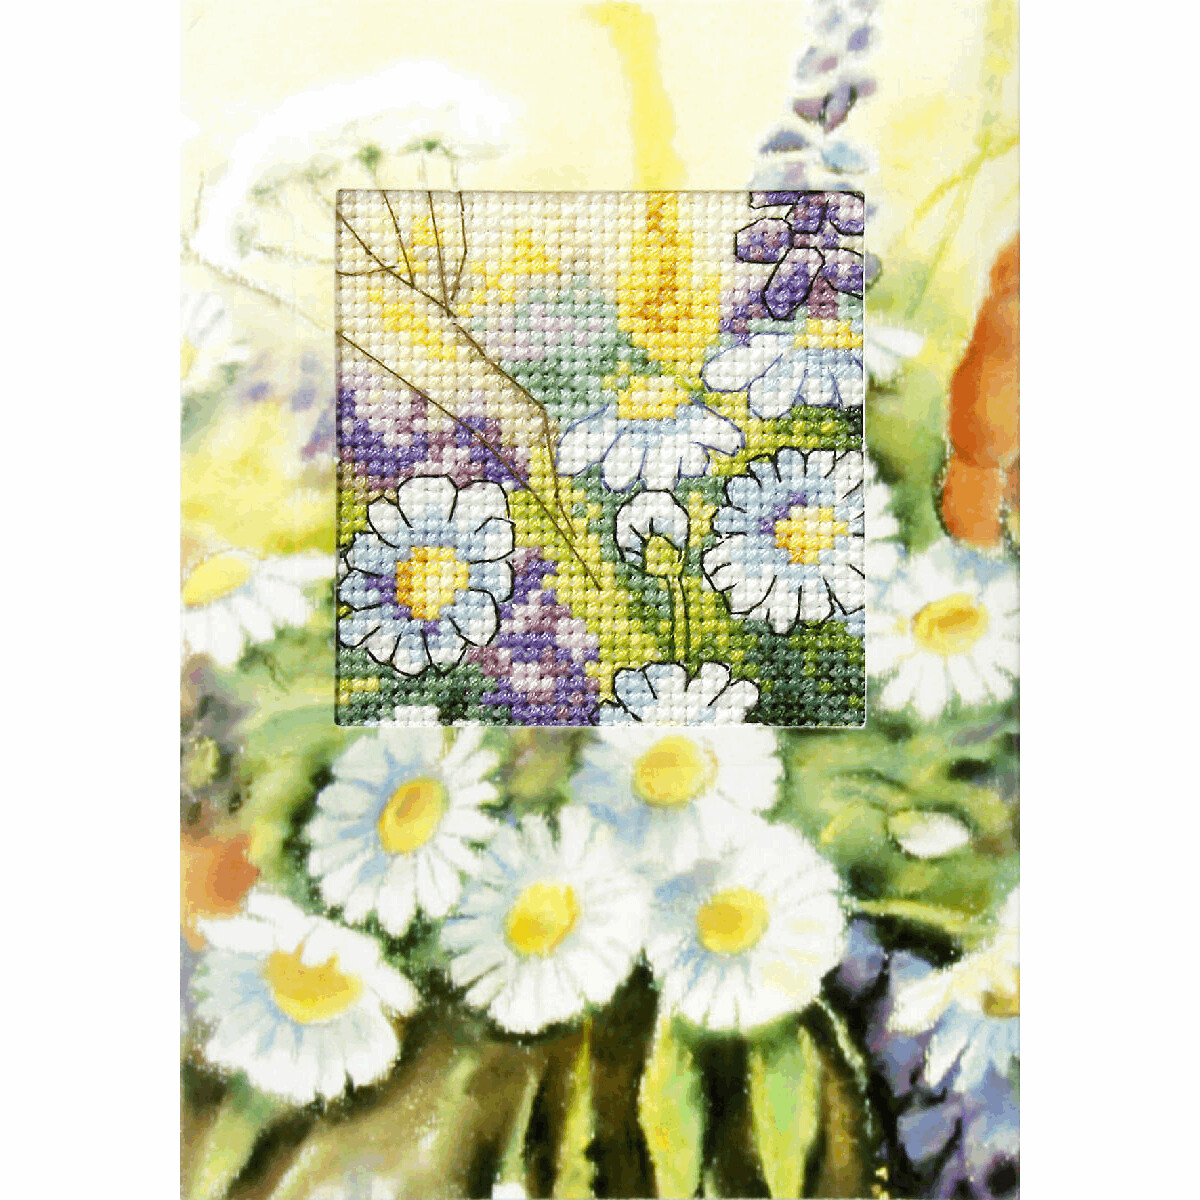 Counted Cross Stitch Kit Greetings Card: Daisies